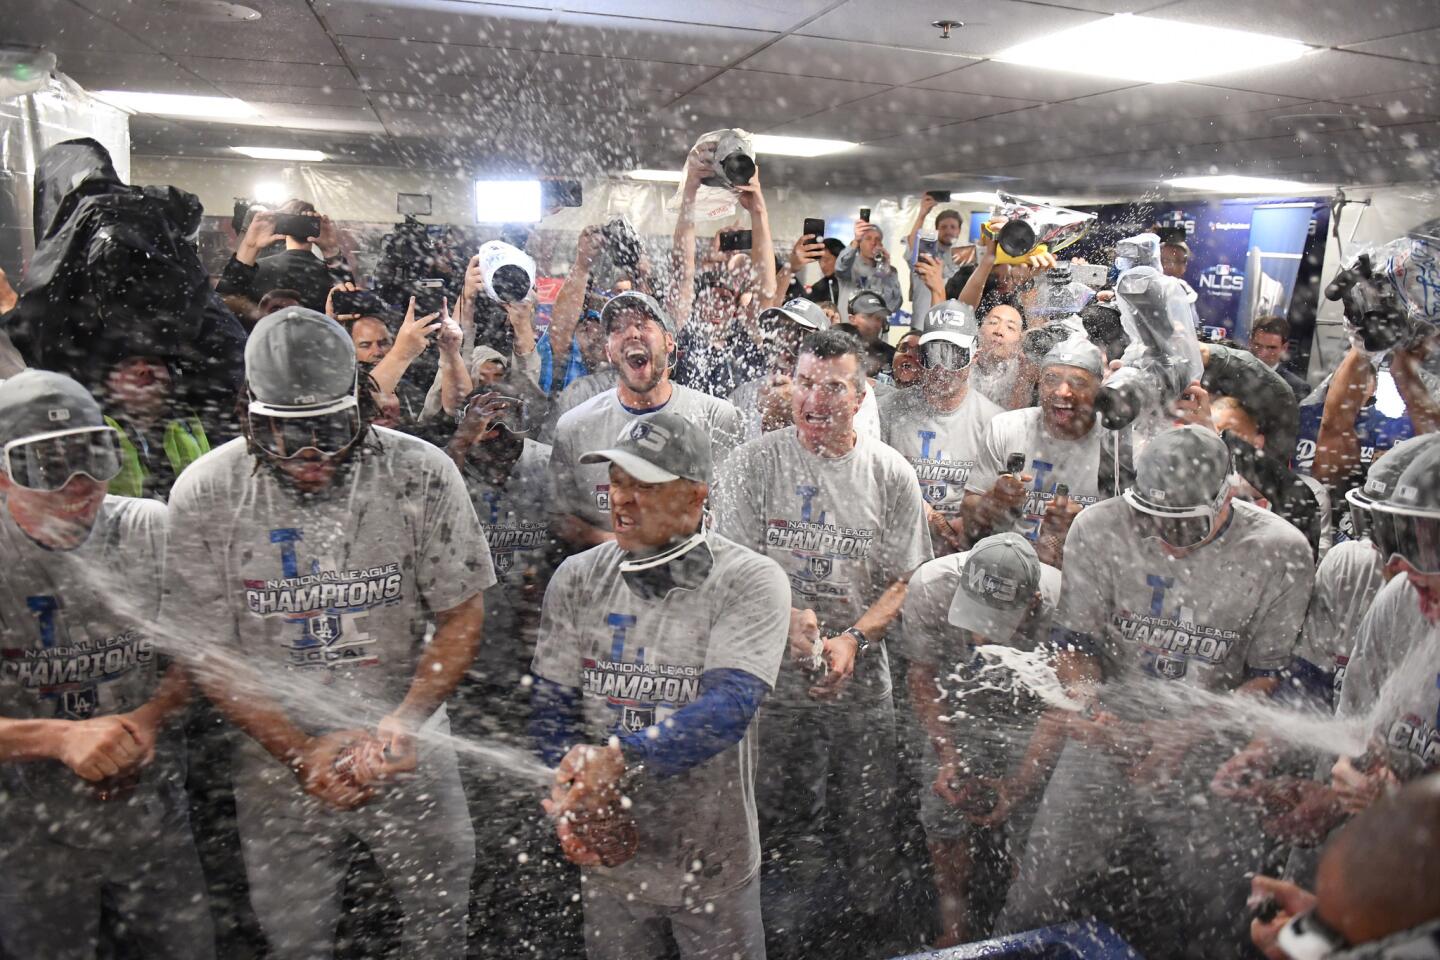 Dodgers celebrate in the locker room after winning game seven of the National League Championship Series.